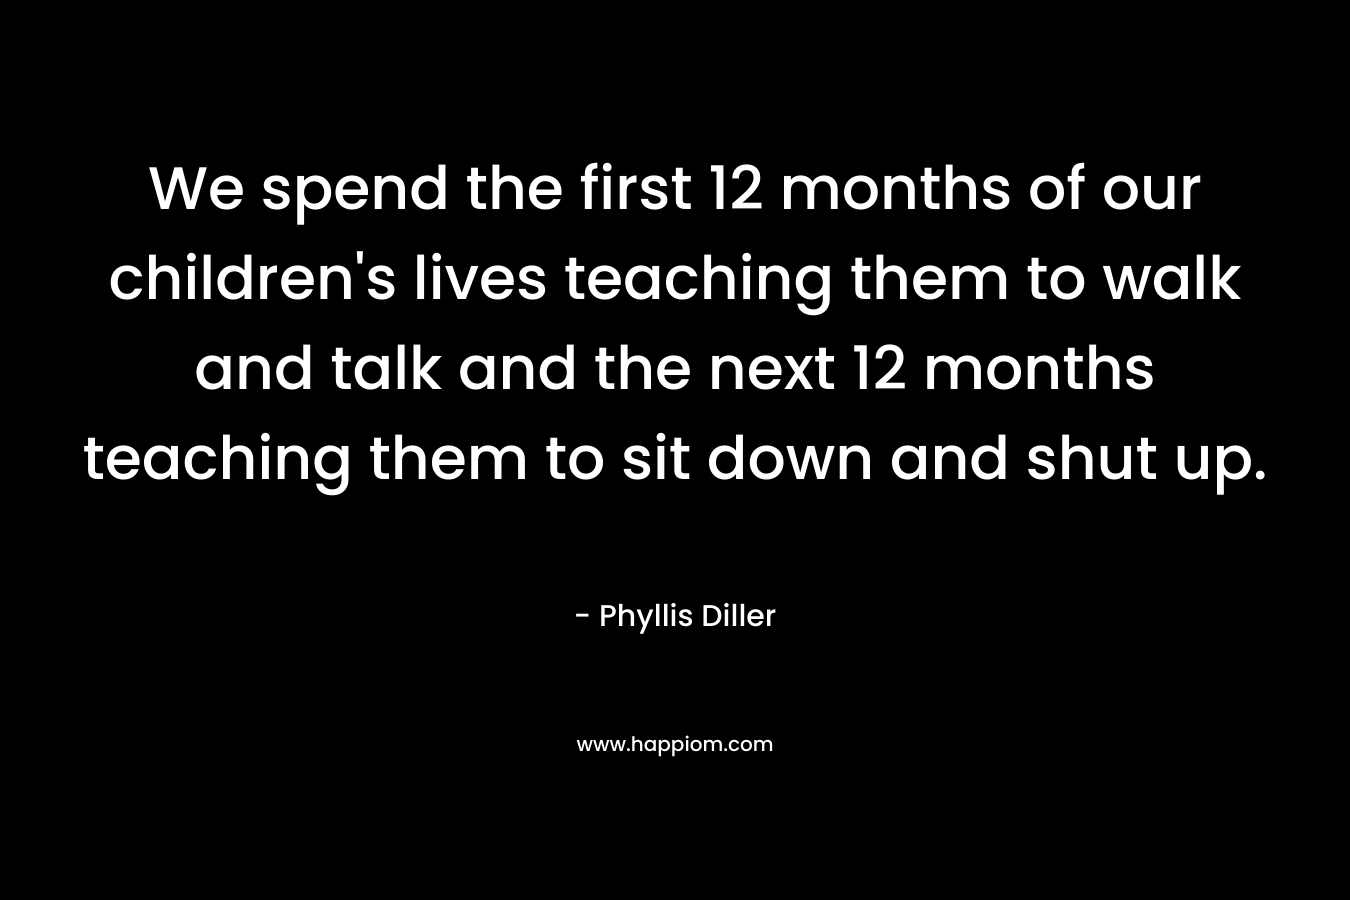 We spend the first 12 months of our children's lives teaching them to walk and talk and the next 12 months teaching them to sit down and shut up.